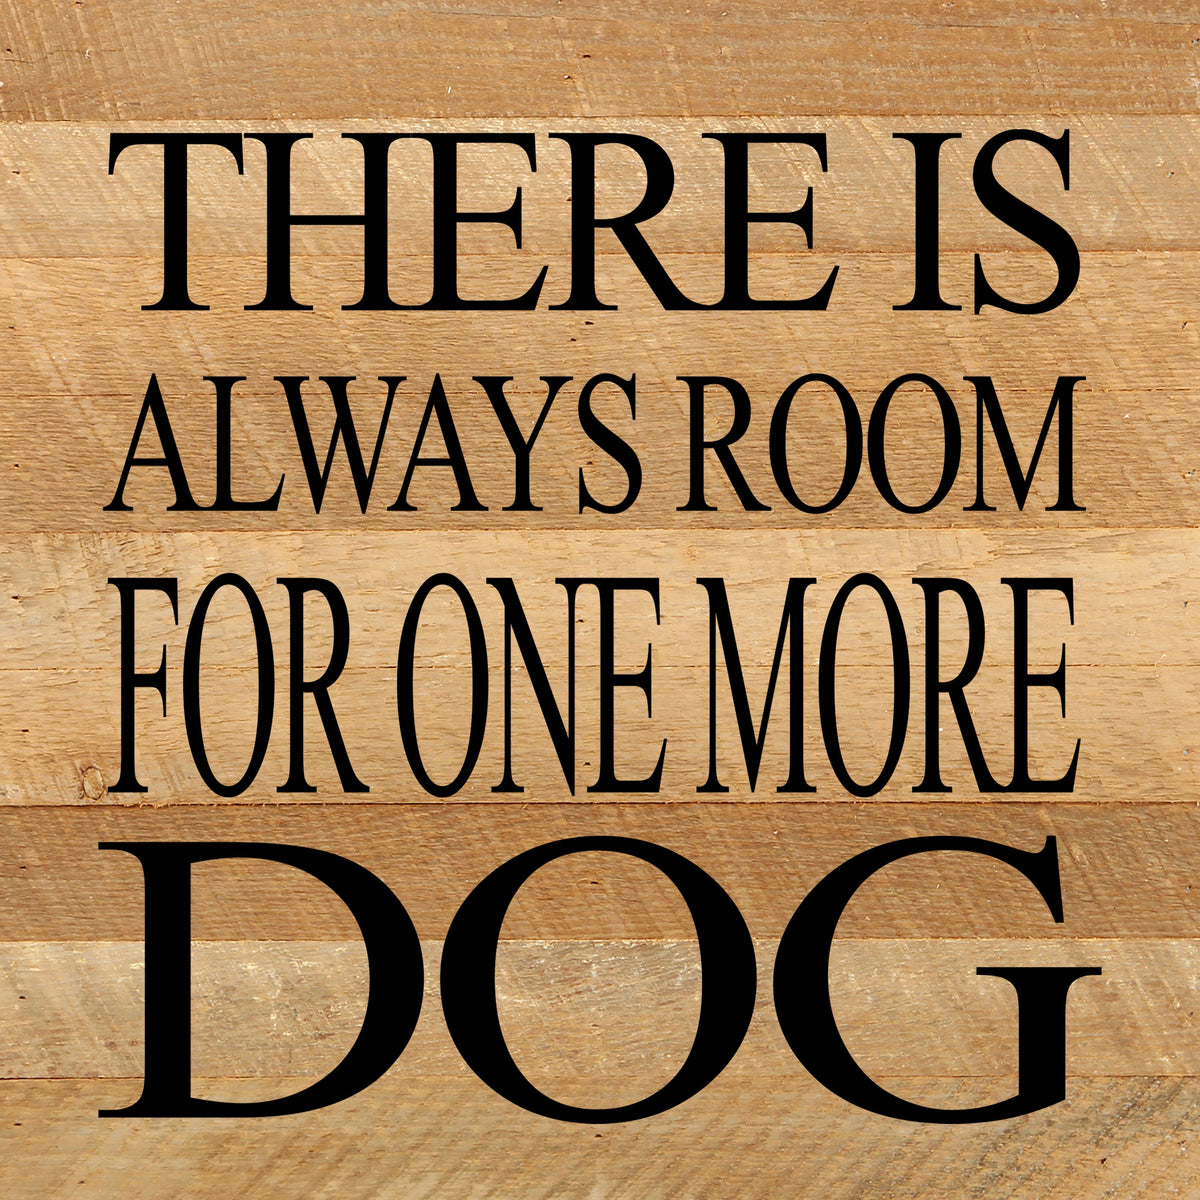 There is always room for one more dog. / 10"x10" Reclaimed Wood Sign